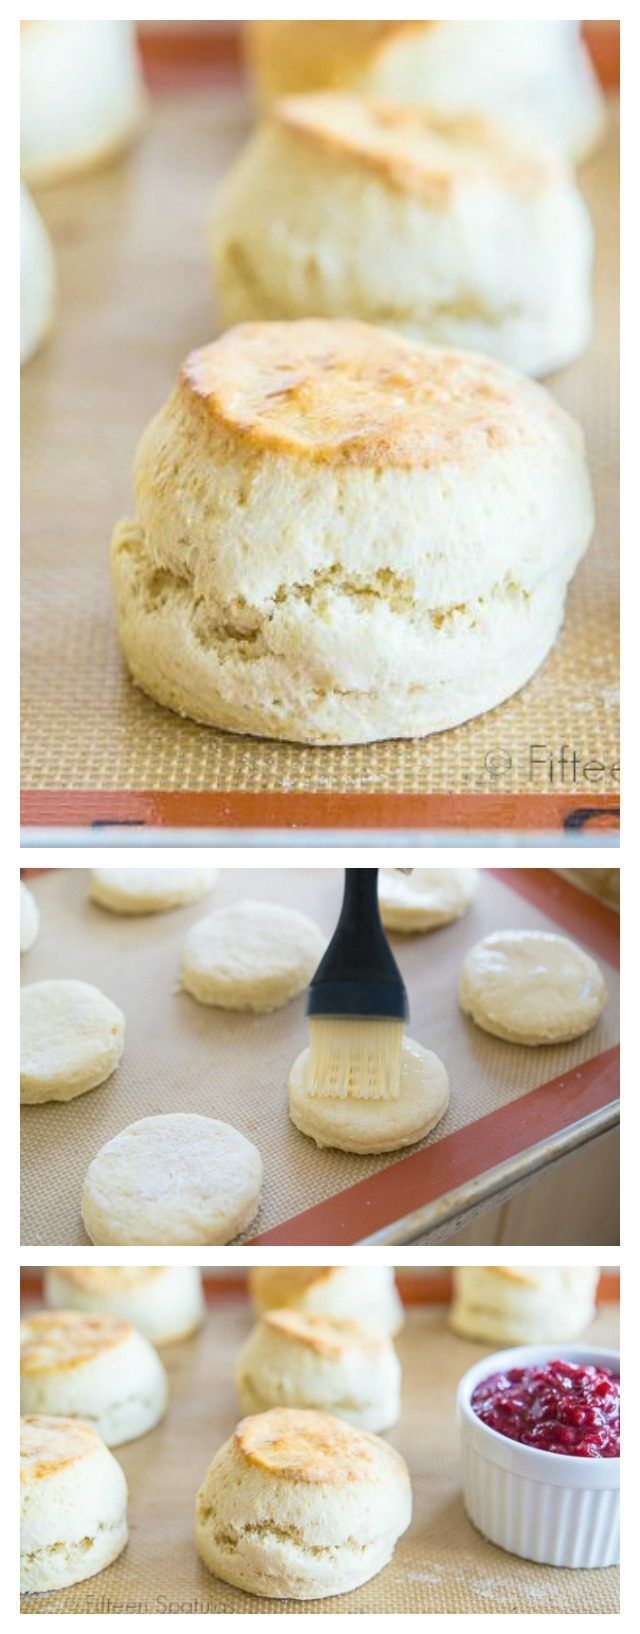 English Style Scones Recipe - Super fluffy and light baked scones -   20 baking recipes scones
 ideas